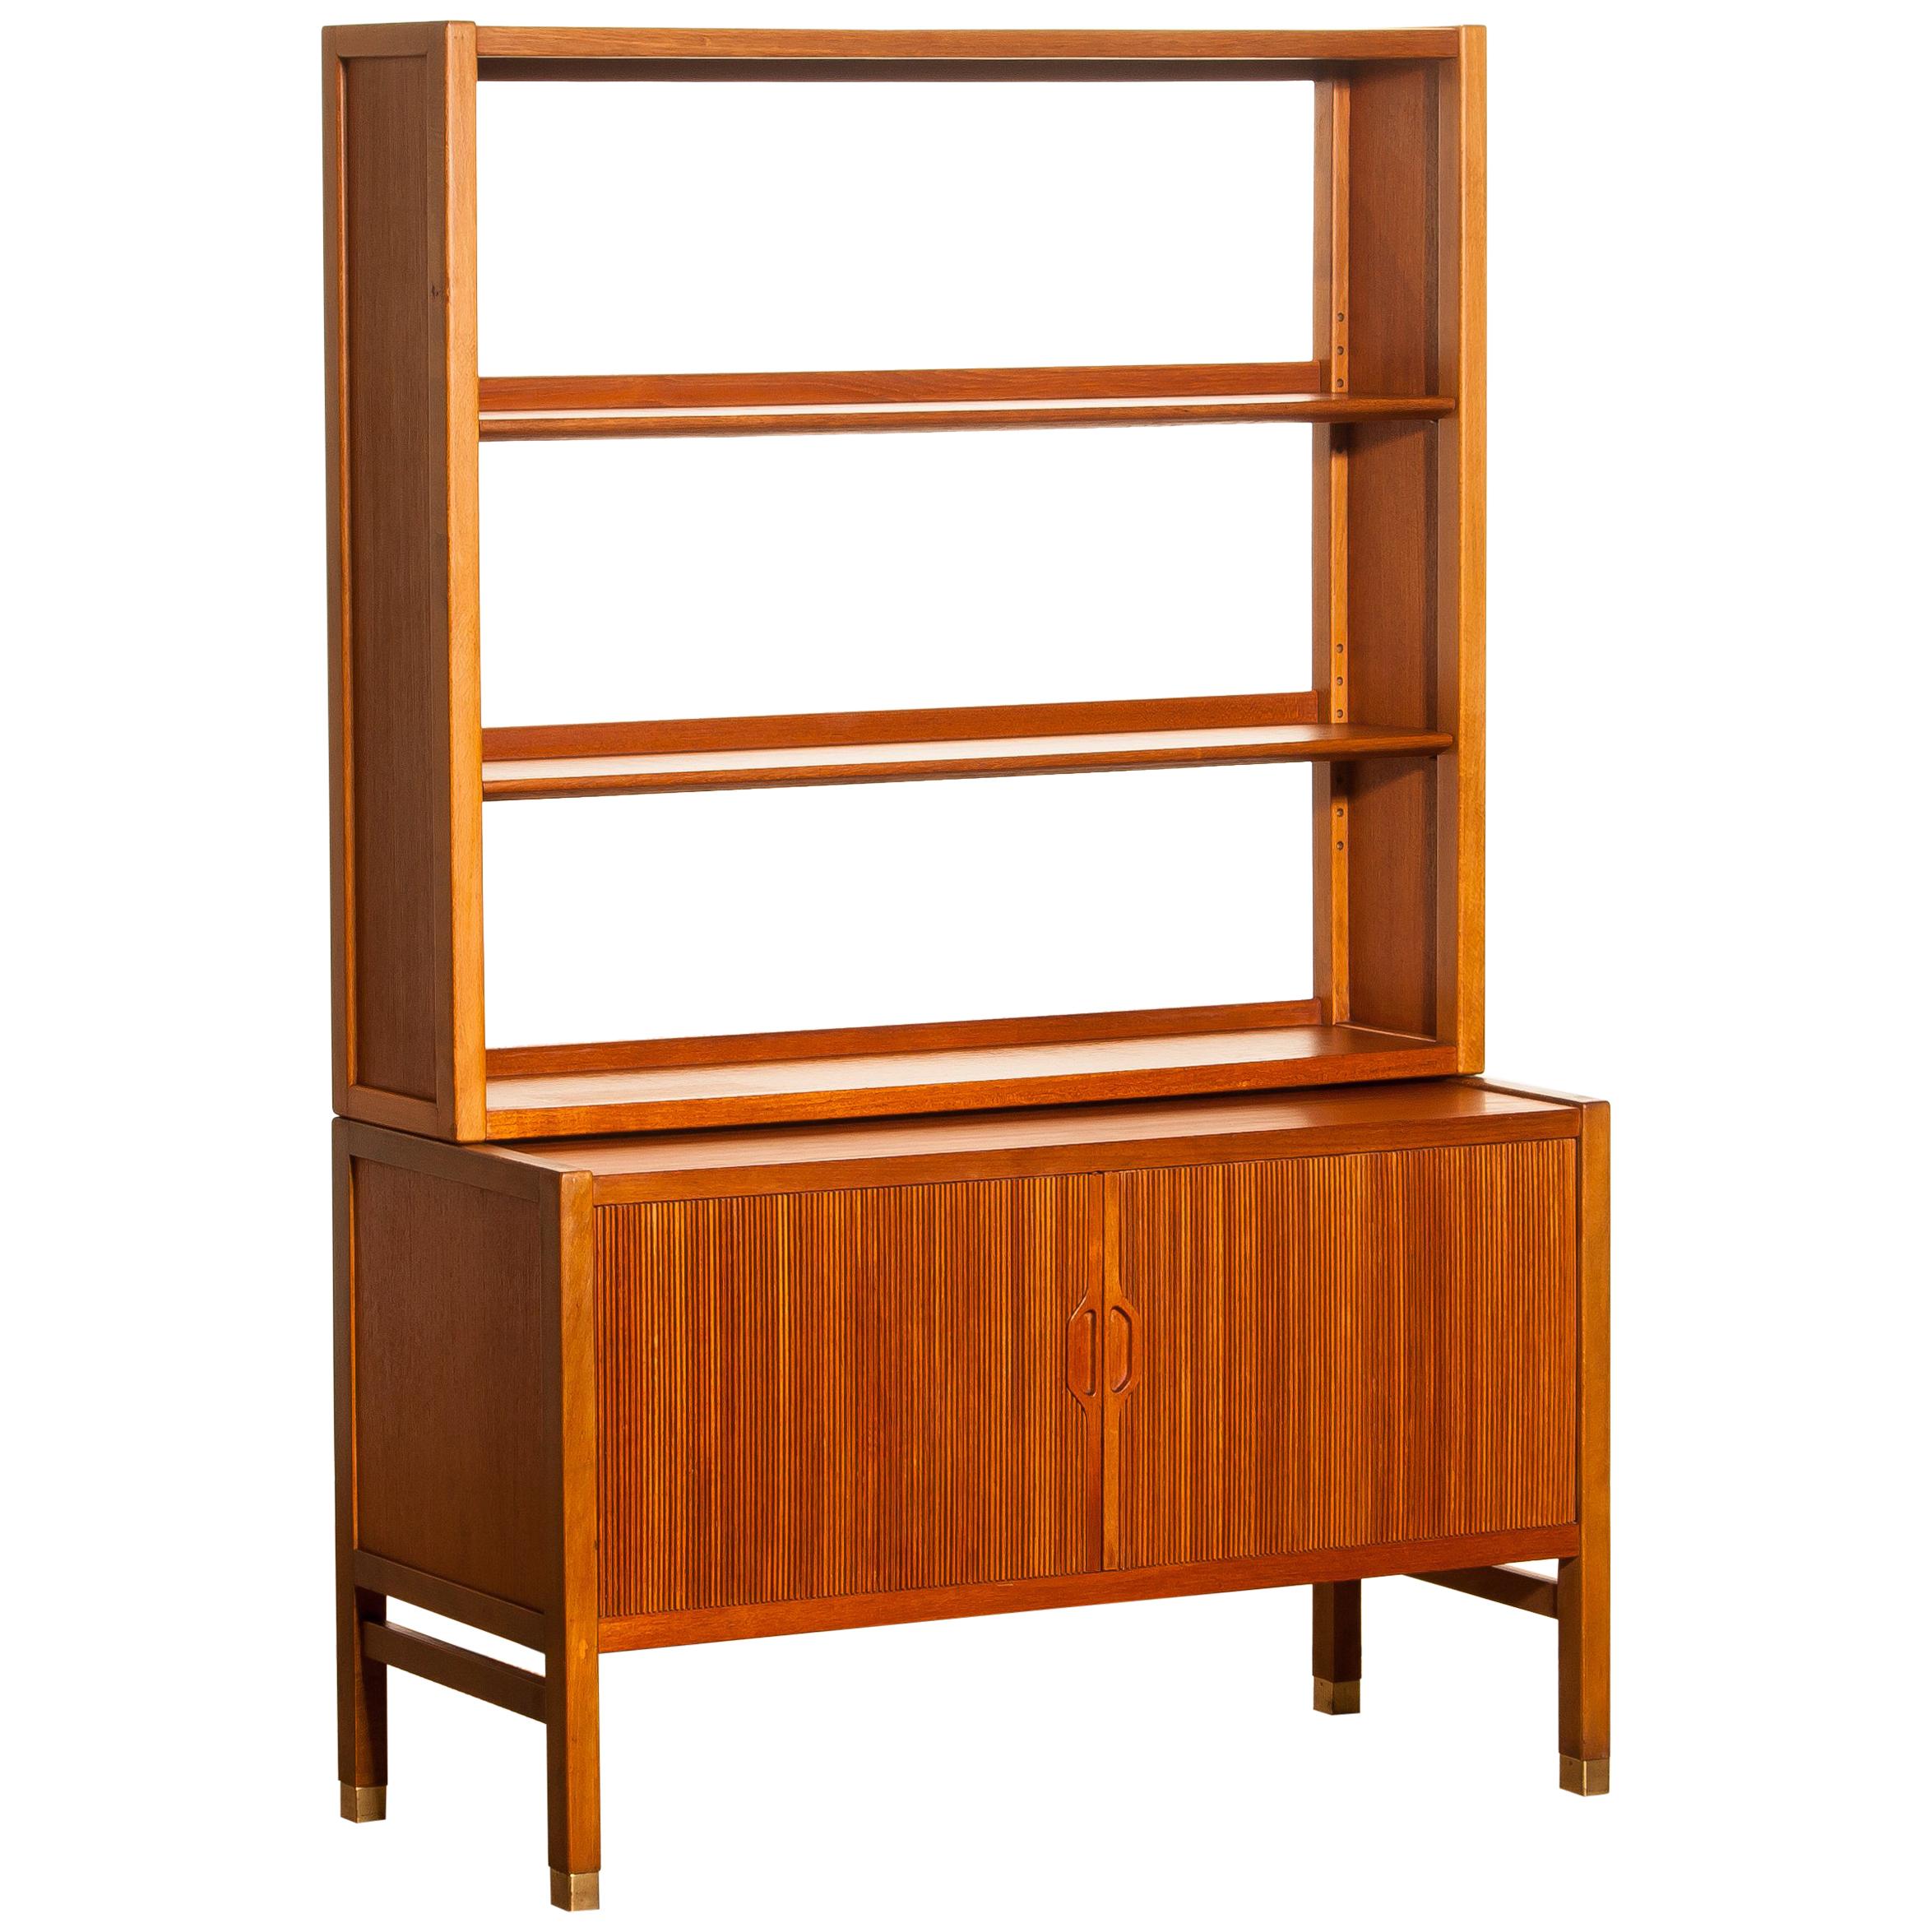 1960s, Teak Tambour Bookcase Cabinet by Carl Aksel Acking for Bodafors, Sweden